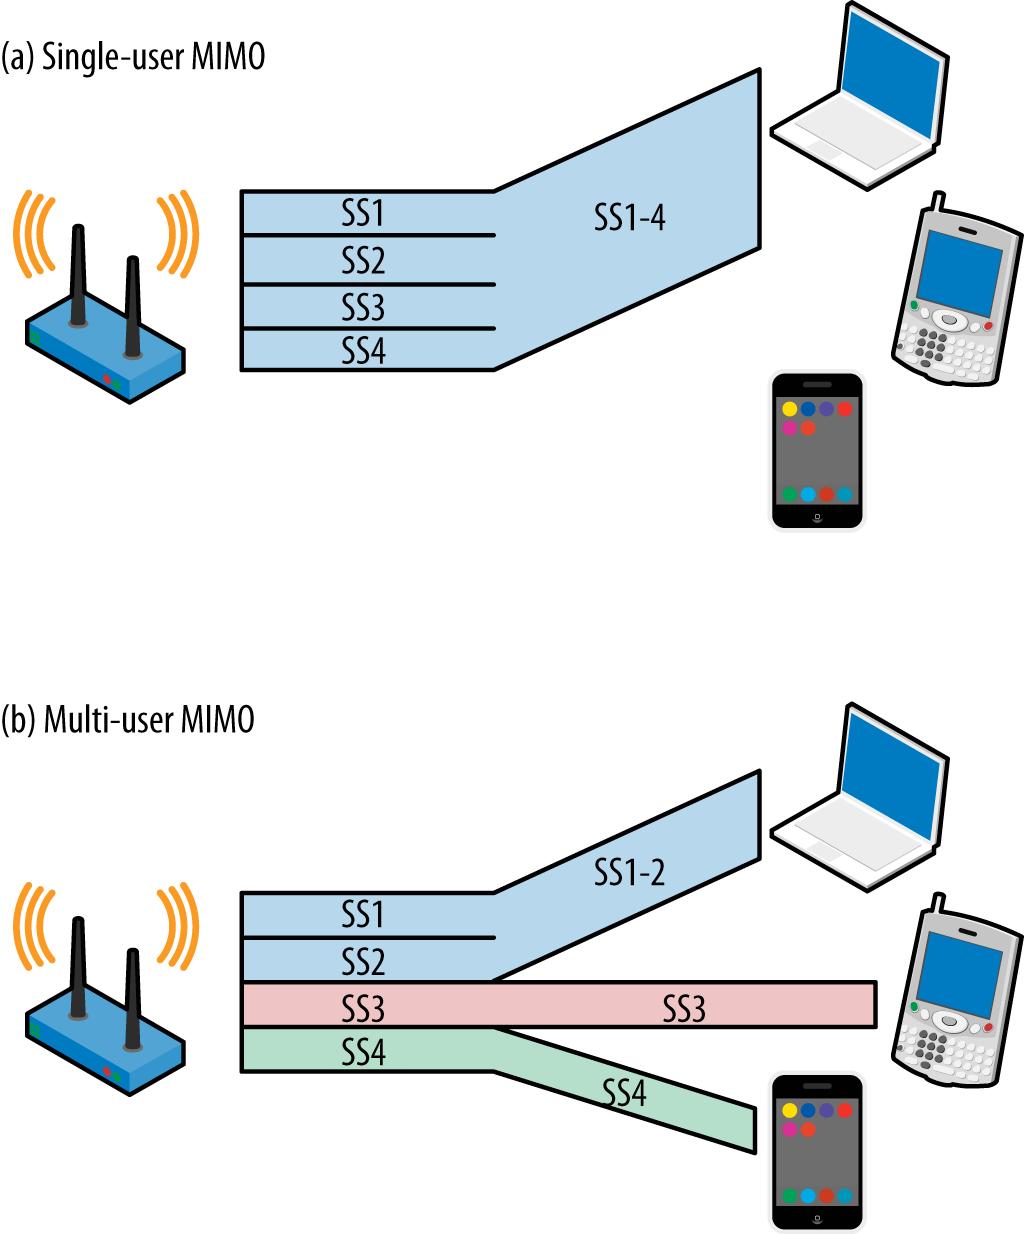 11ac also adds important enhancements to the multiple input-multiple output (MIMO) capability.